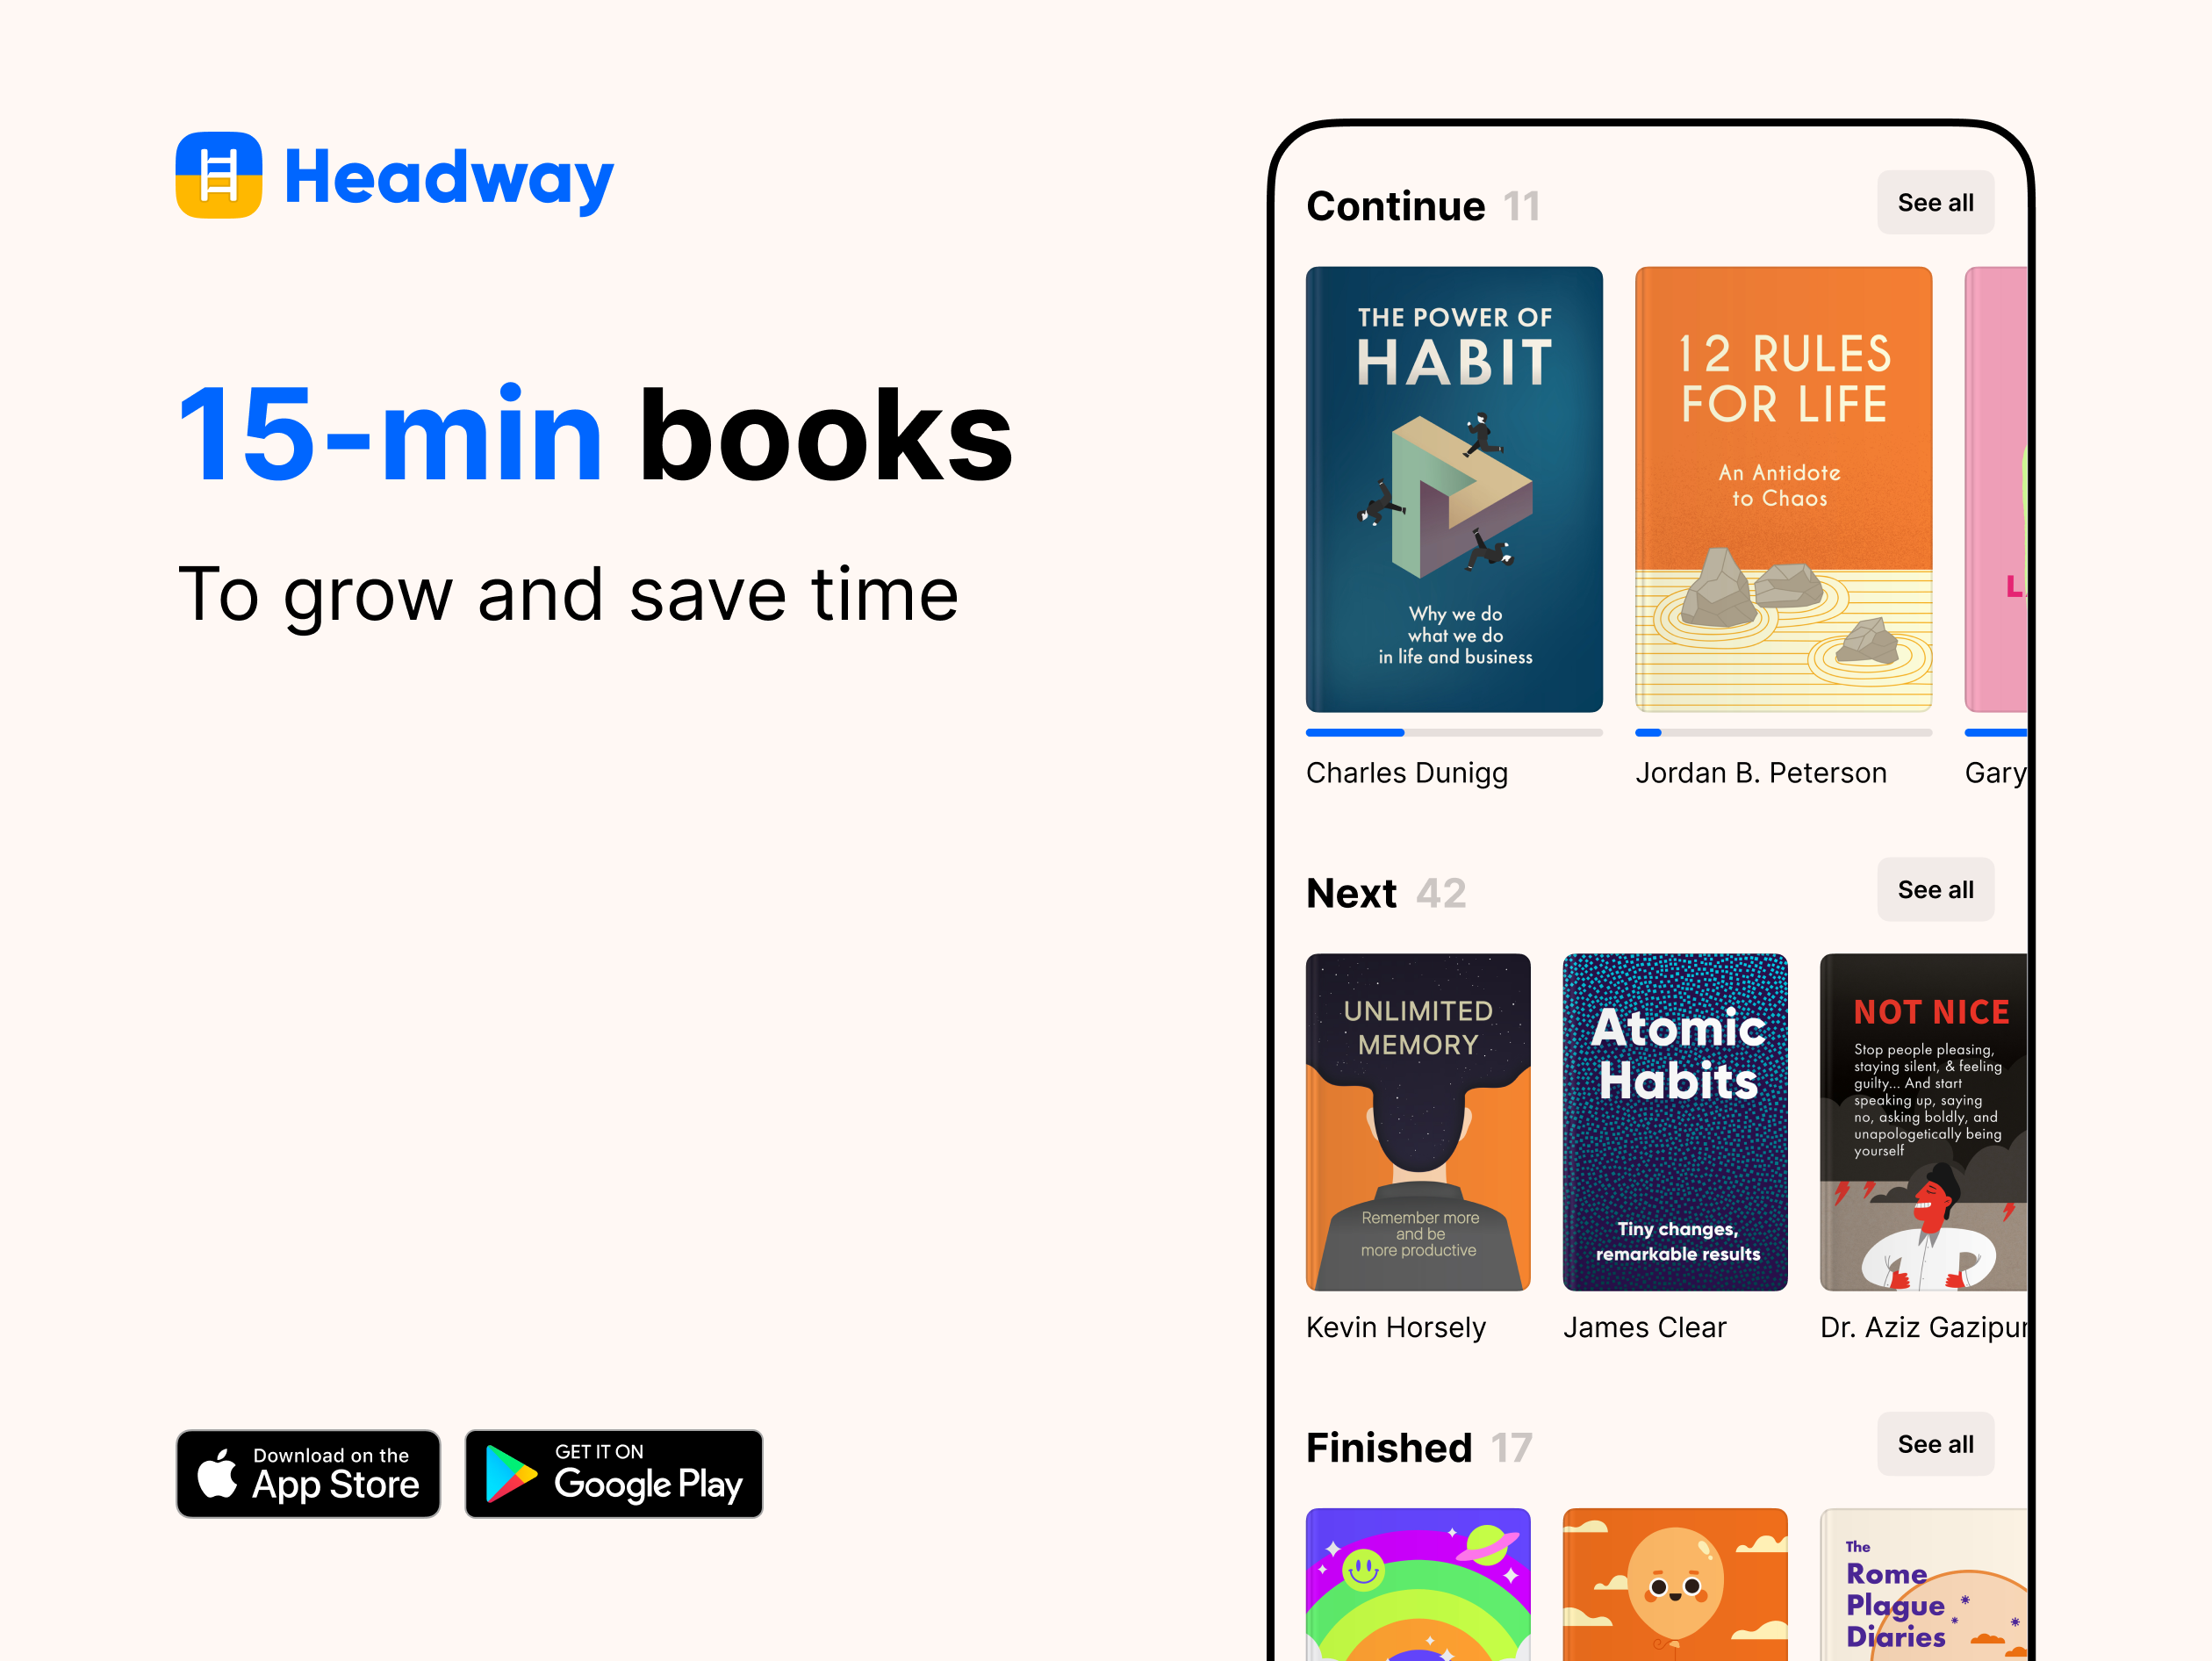 Read best-selling nonfiction books in just 15 minutes with Headway